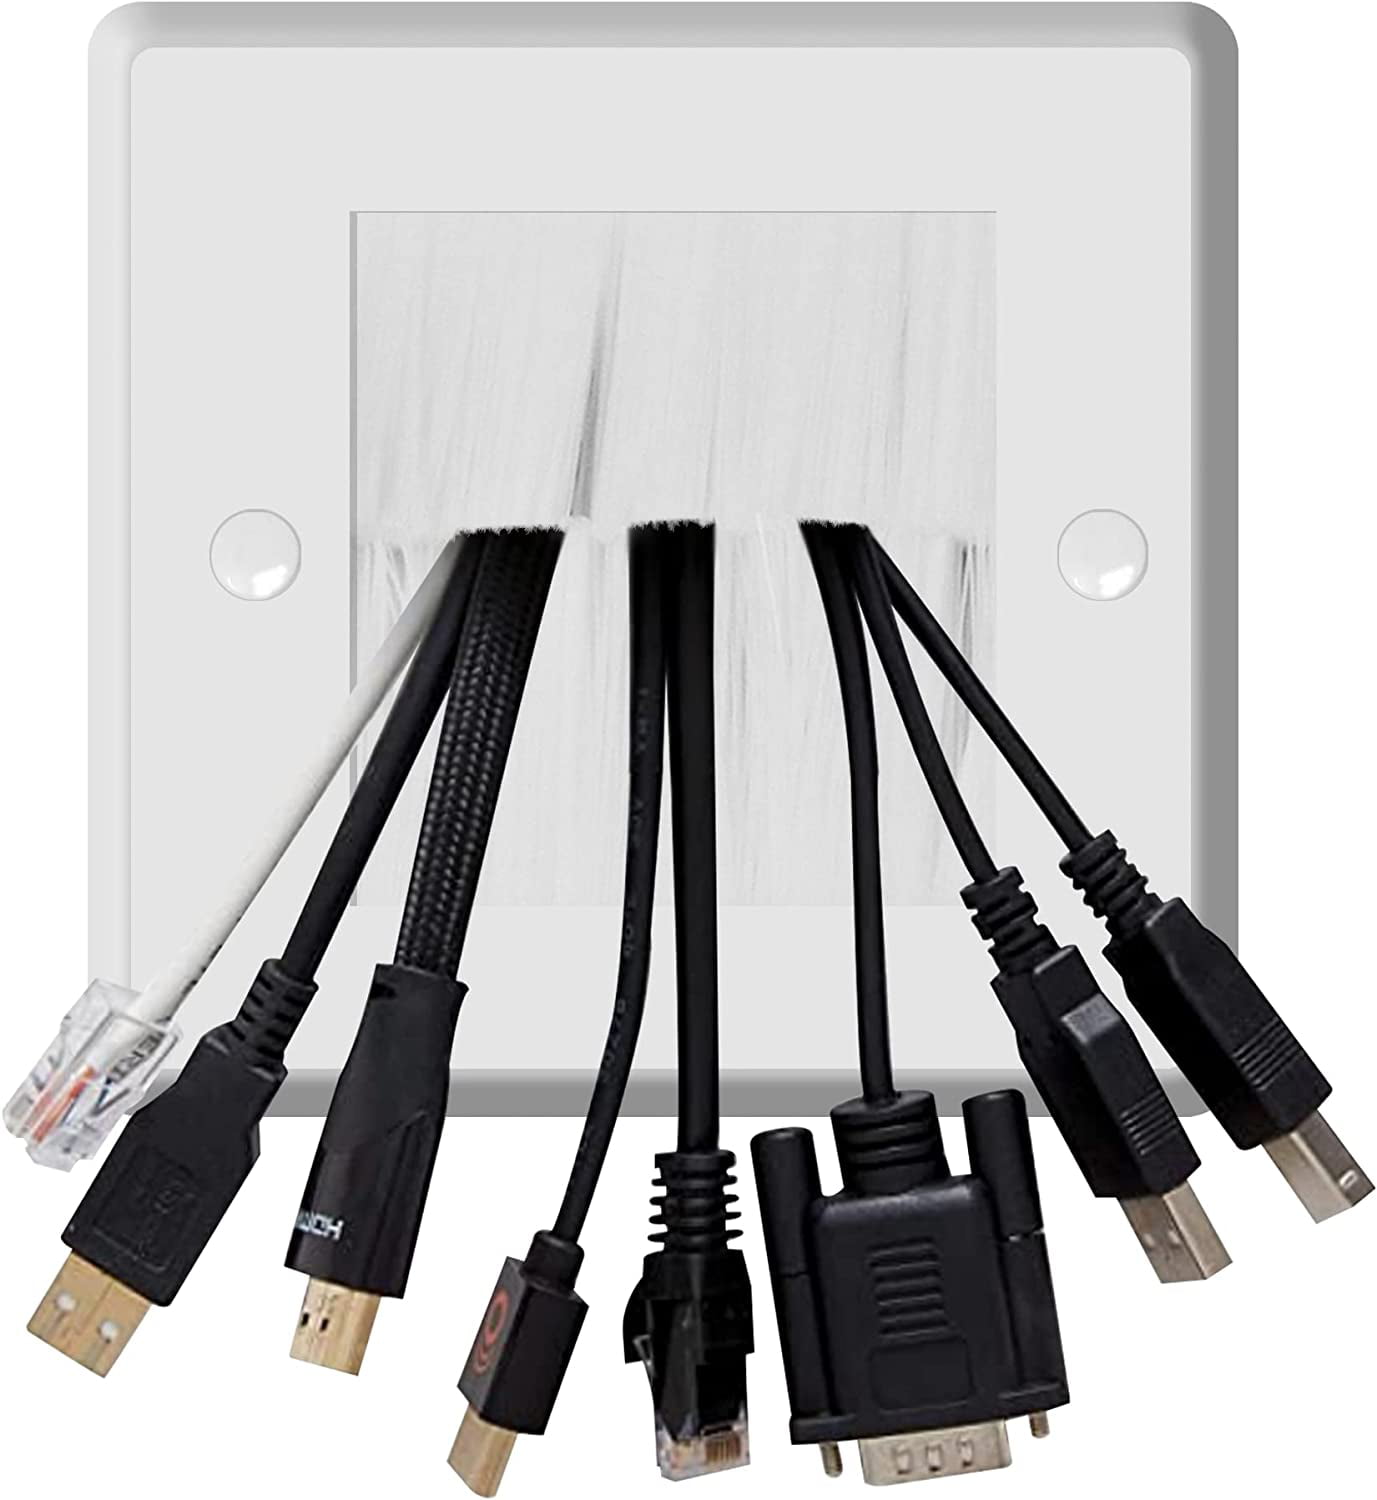 in Wall Cable Management Kit for TV - TV Cord Hider Kit, Cord Hiders for TV  on